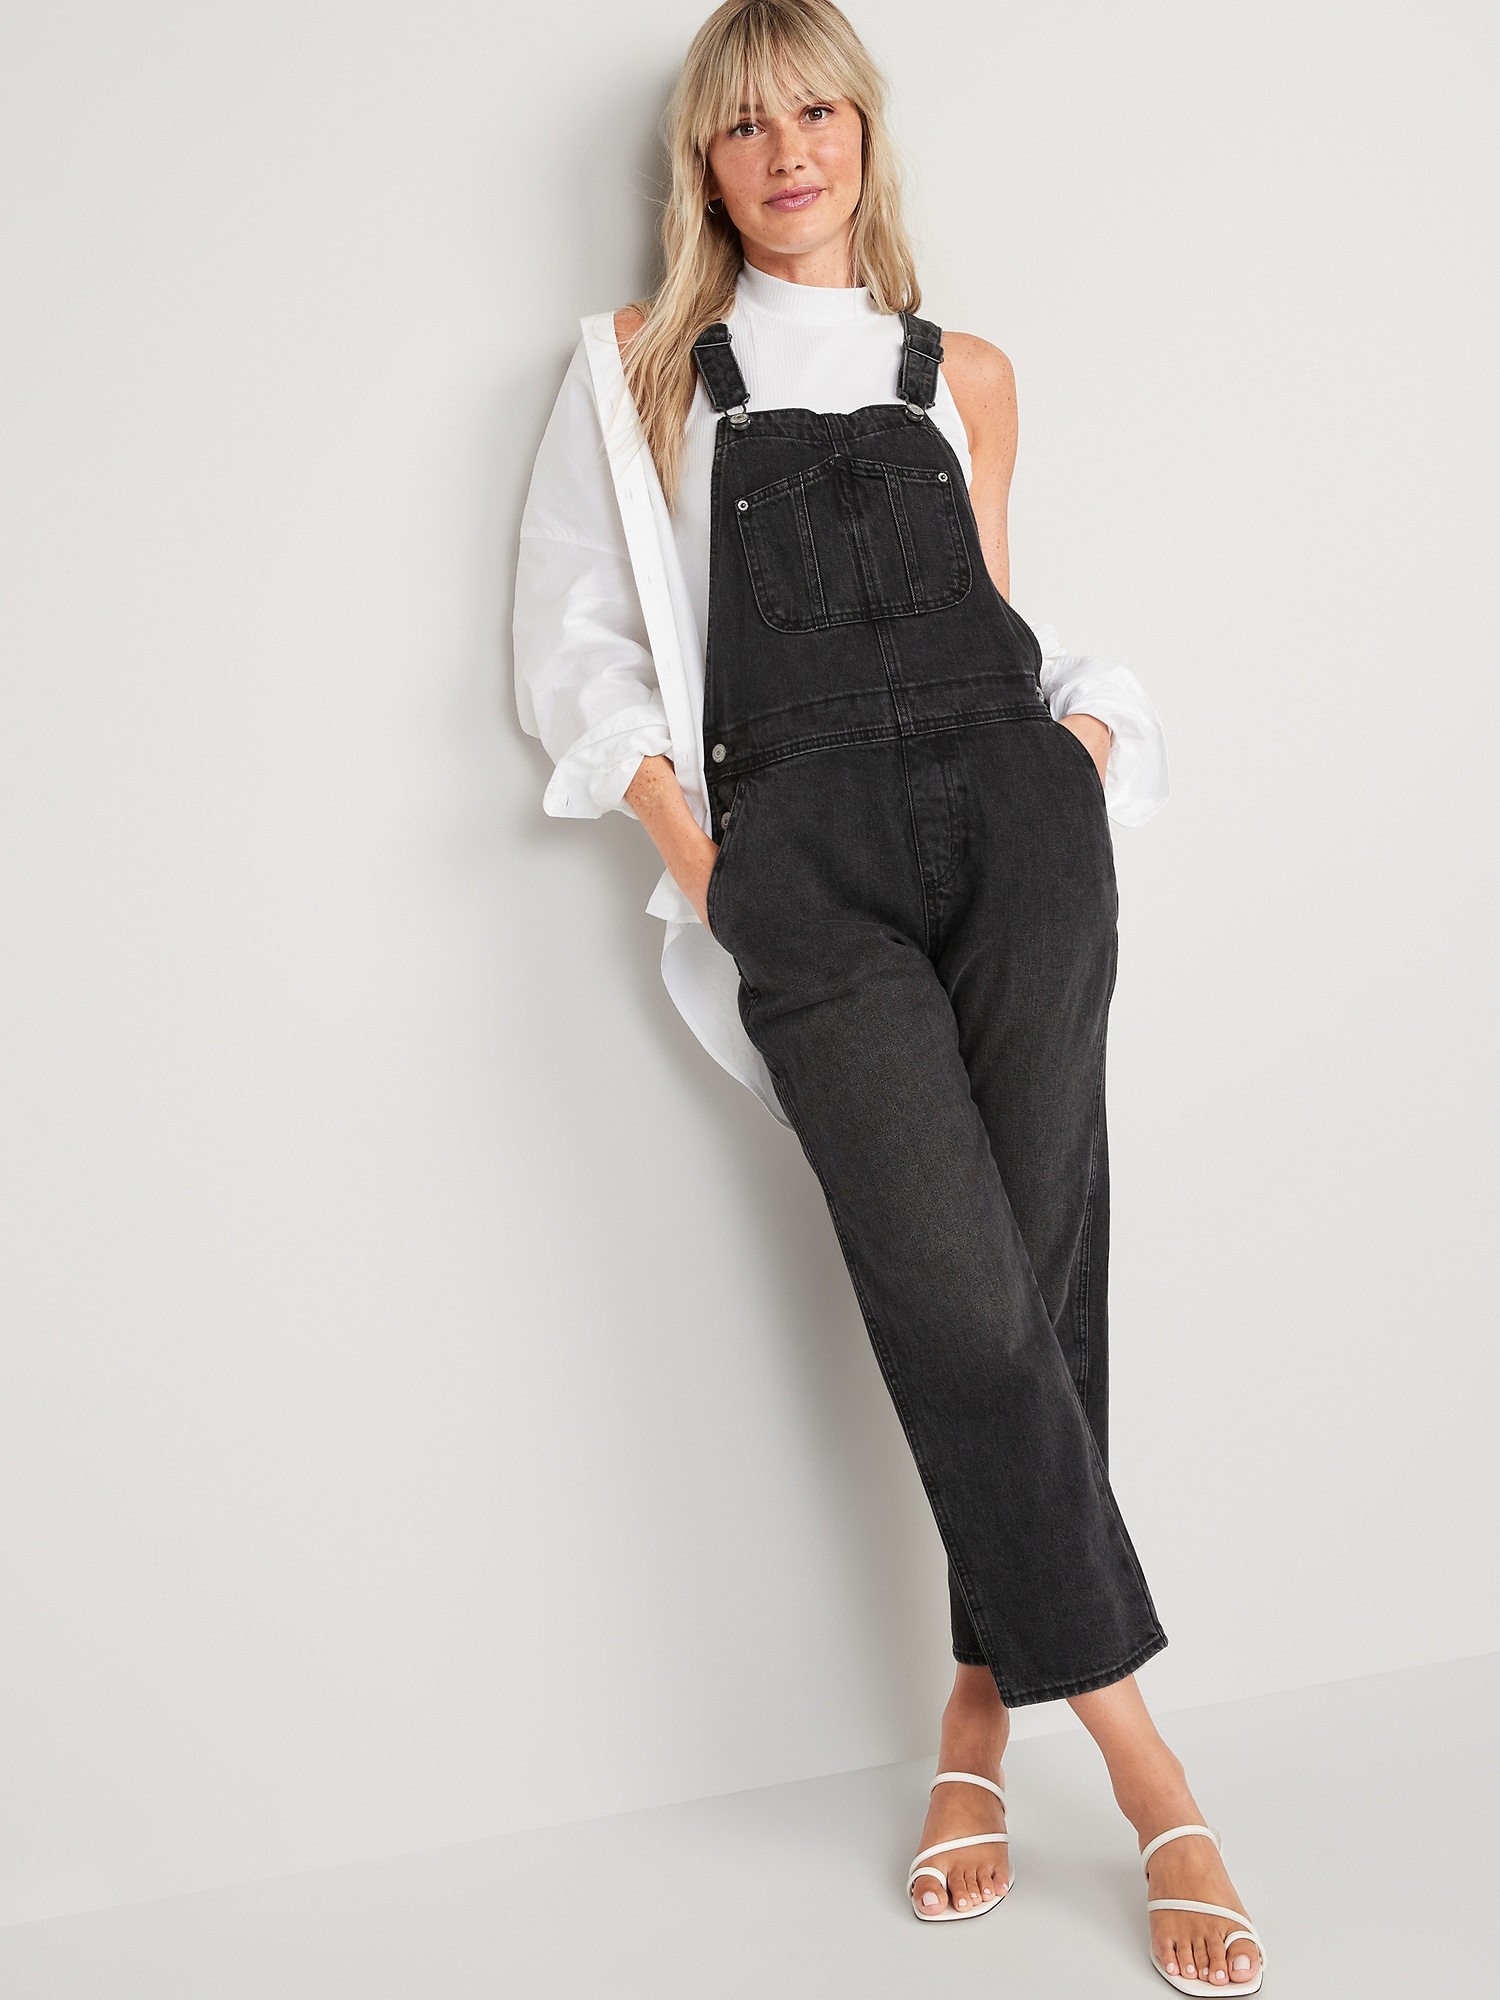 O.G. Workwear Black-Wash Jean Overalls for Women | Old Navy